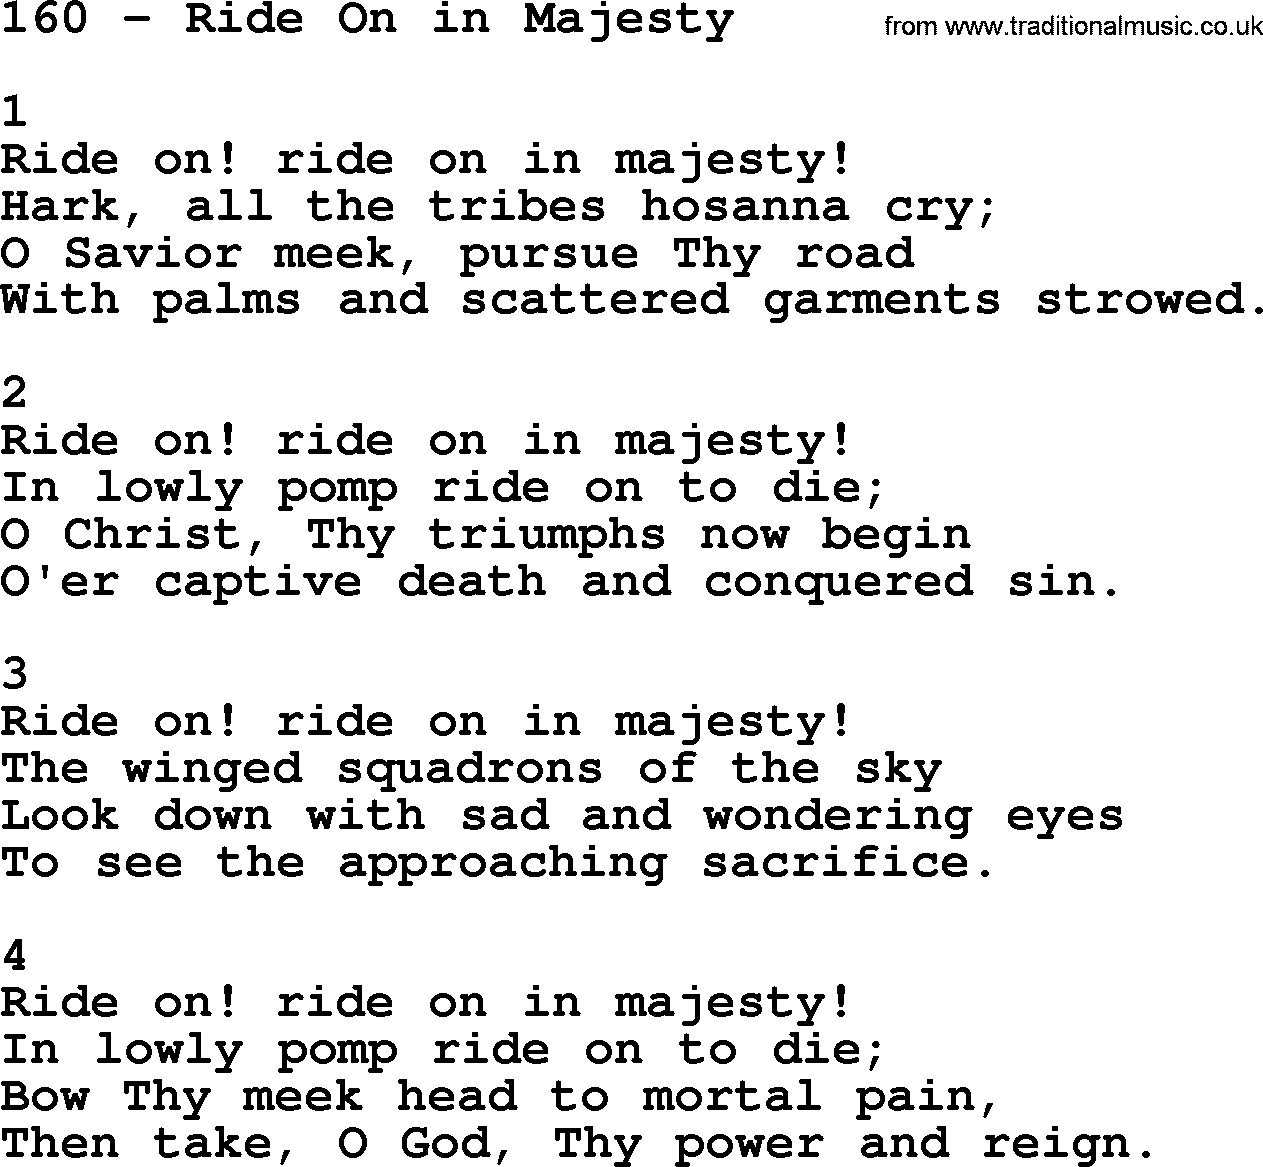 Complete Adventis Hymnal, title: 160-Ride On In Majesty, with lyrics, midi, mp3, powerpoints(PPT) and PDF,